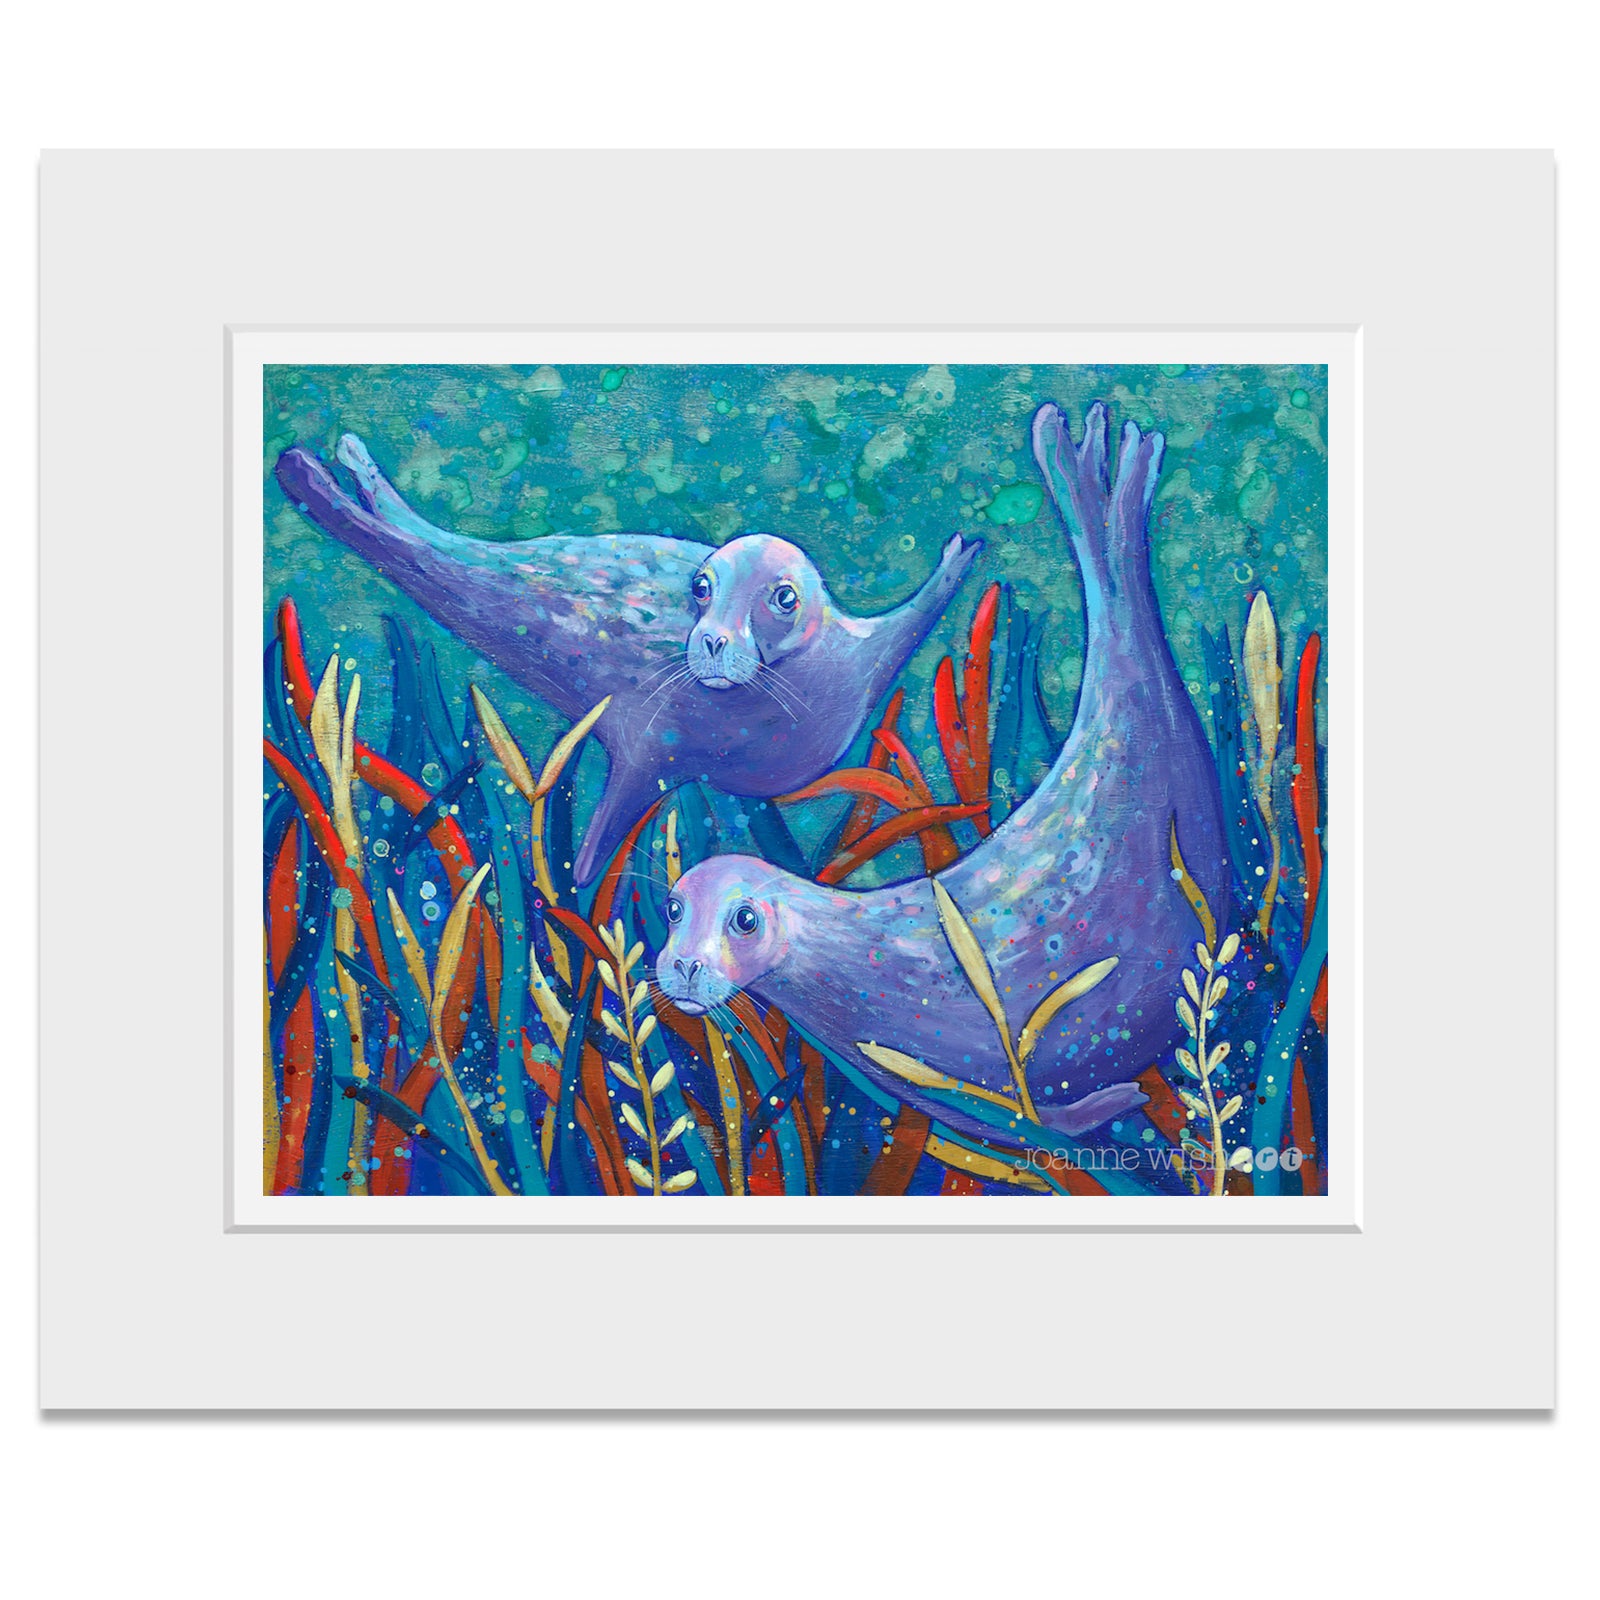 A mounted print of two great seals swimming underwater in amongst the seaweed.